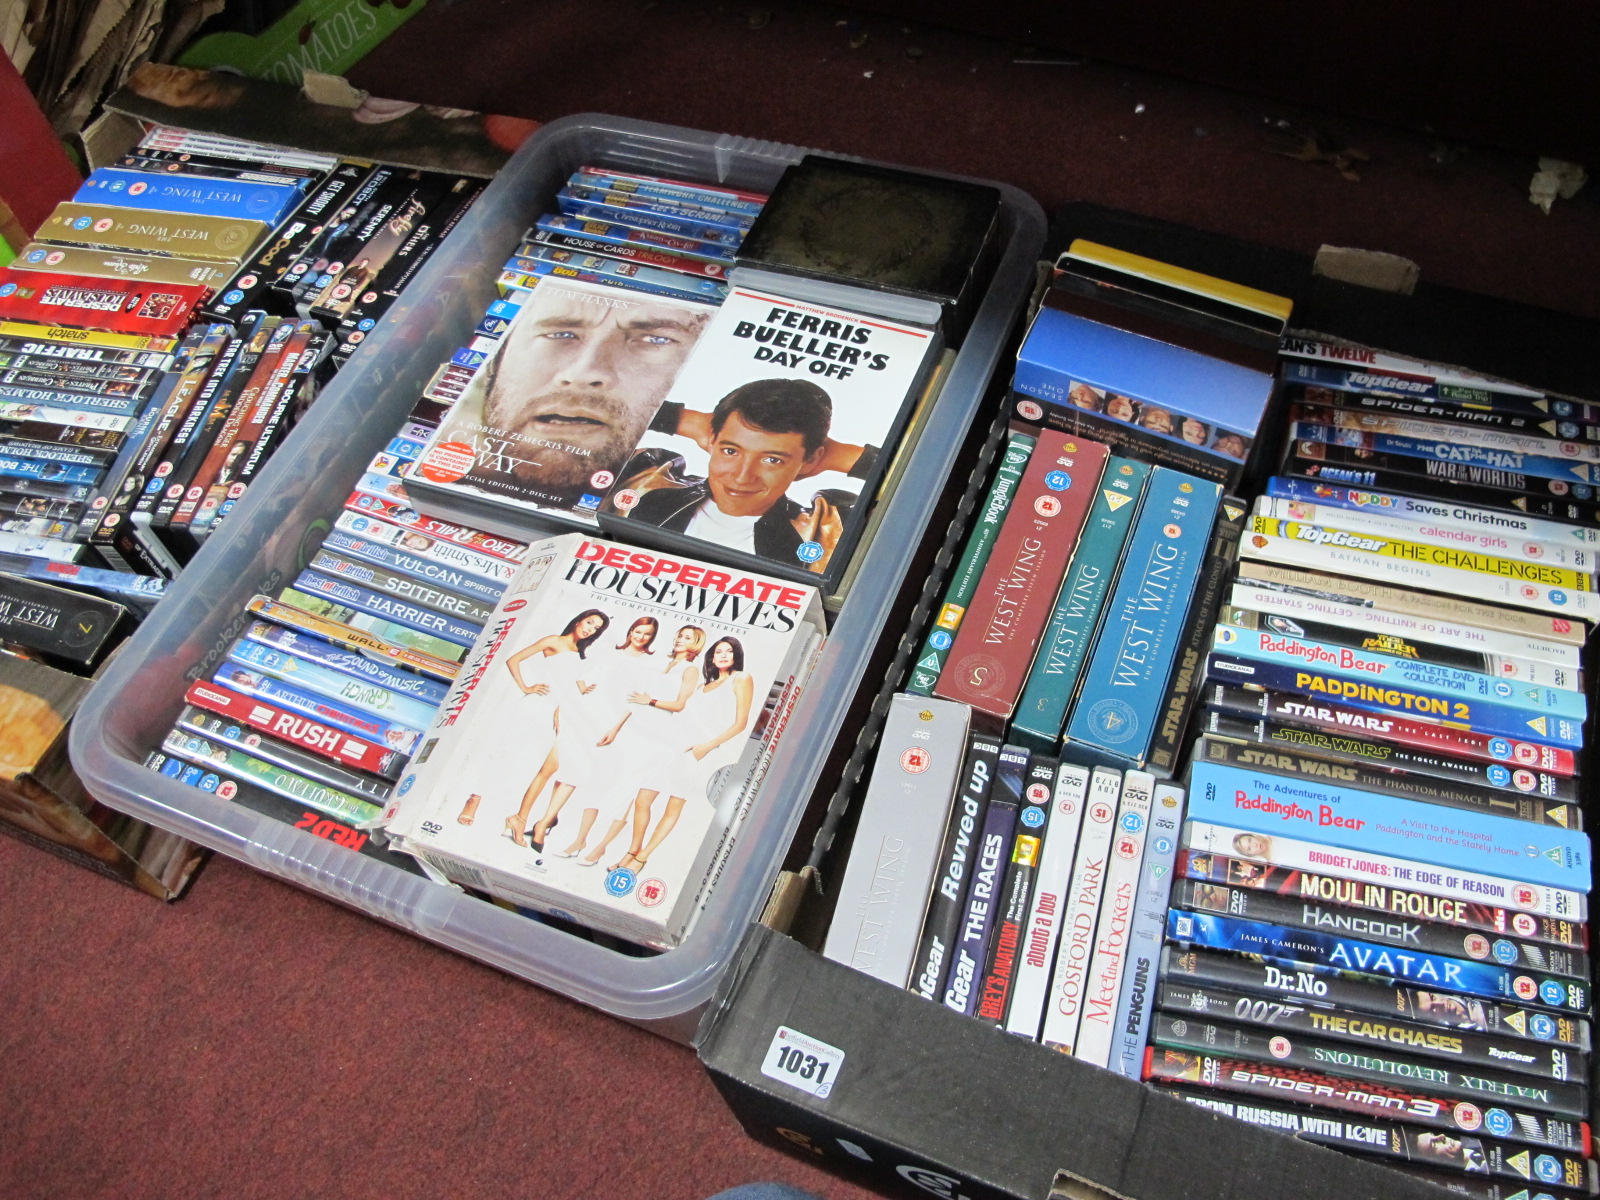 A Quantity of DVD's:- Three Boxes